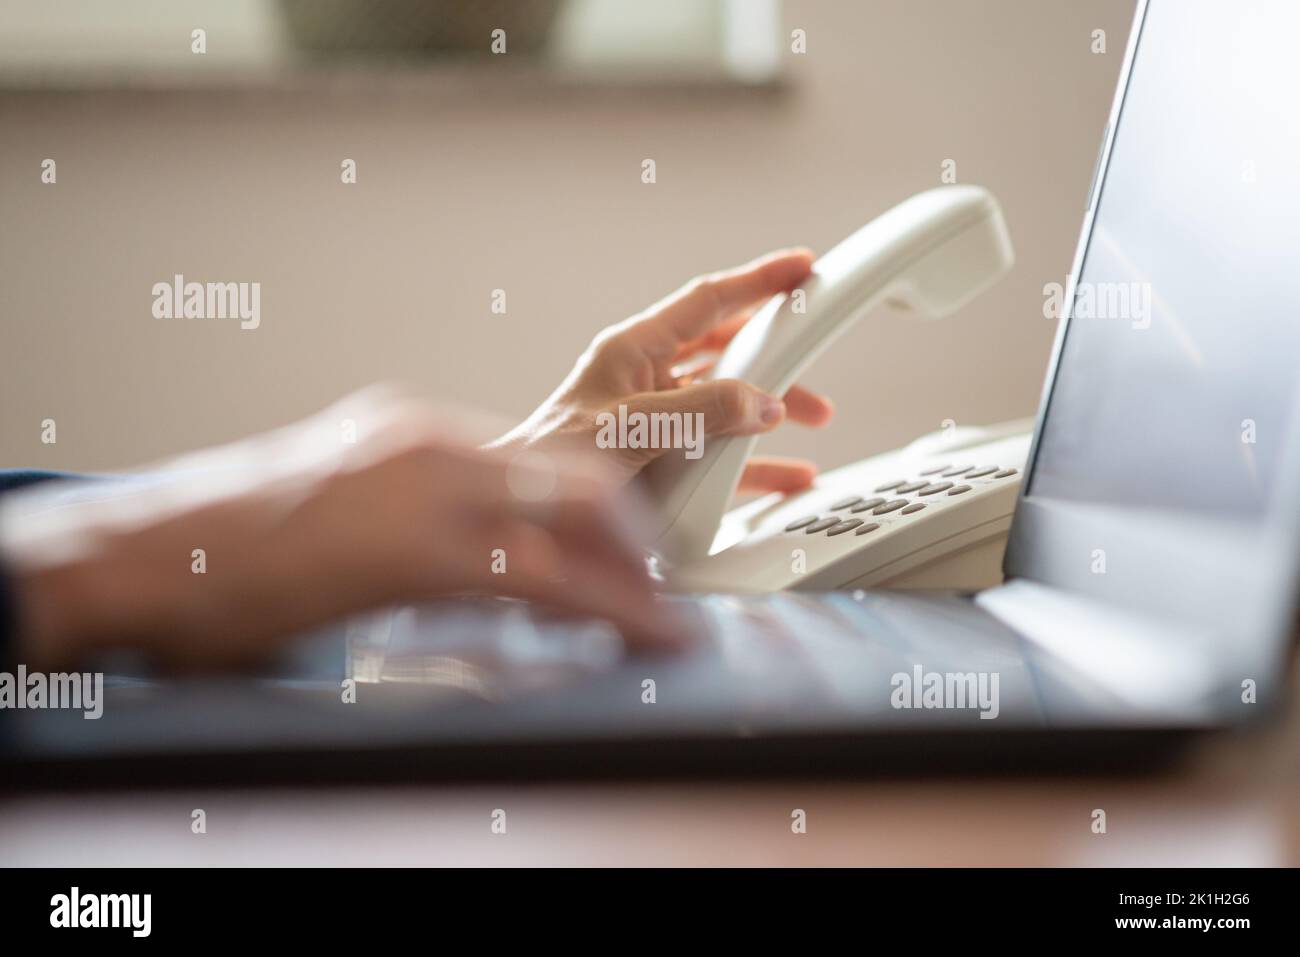 Closeup view of busy caucasian businesswoman typing on laptop computer while also making a call using classical white landline telephone. Stock Photo